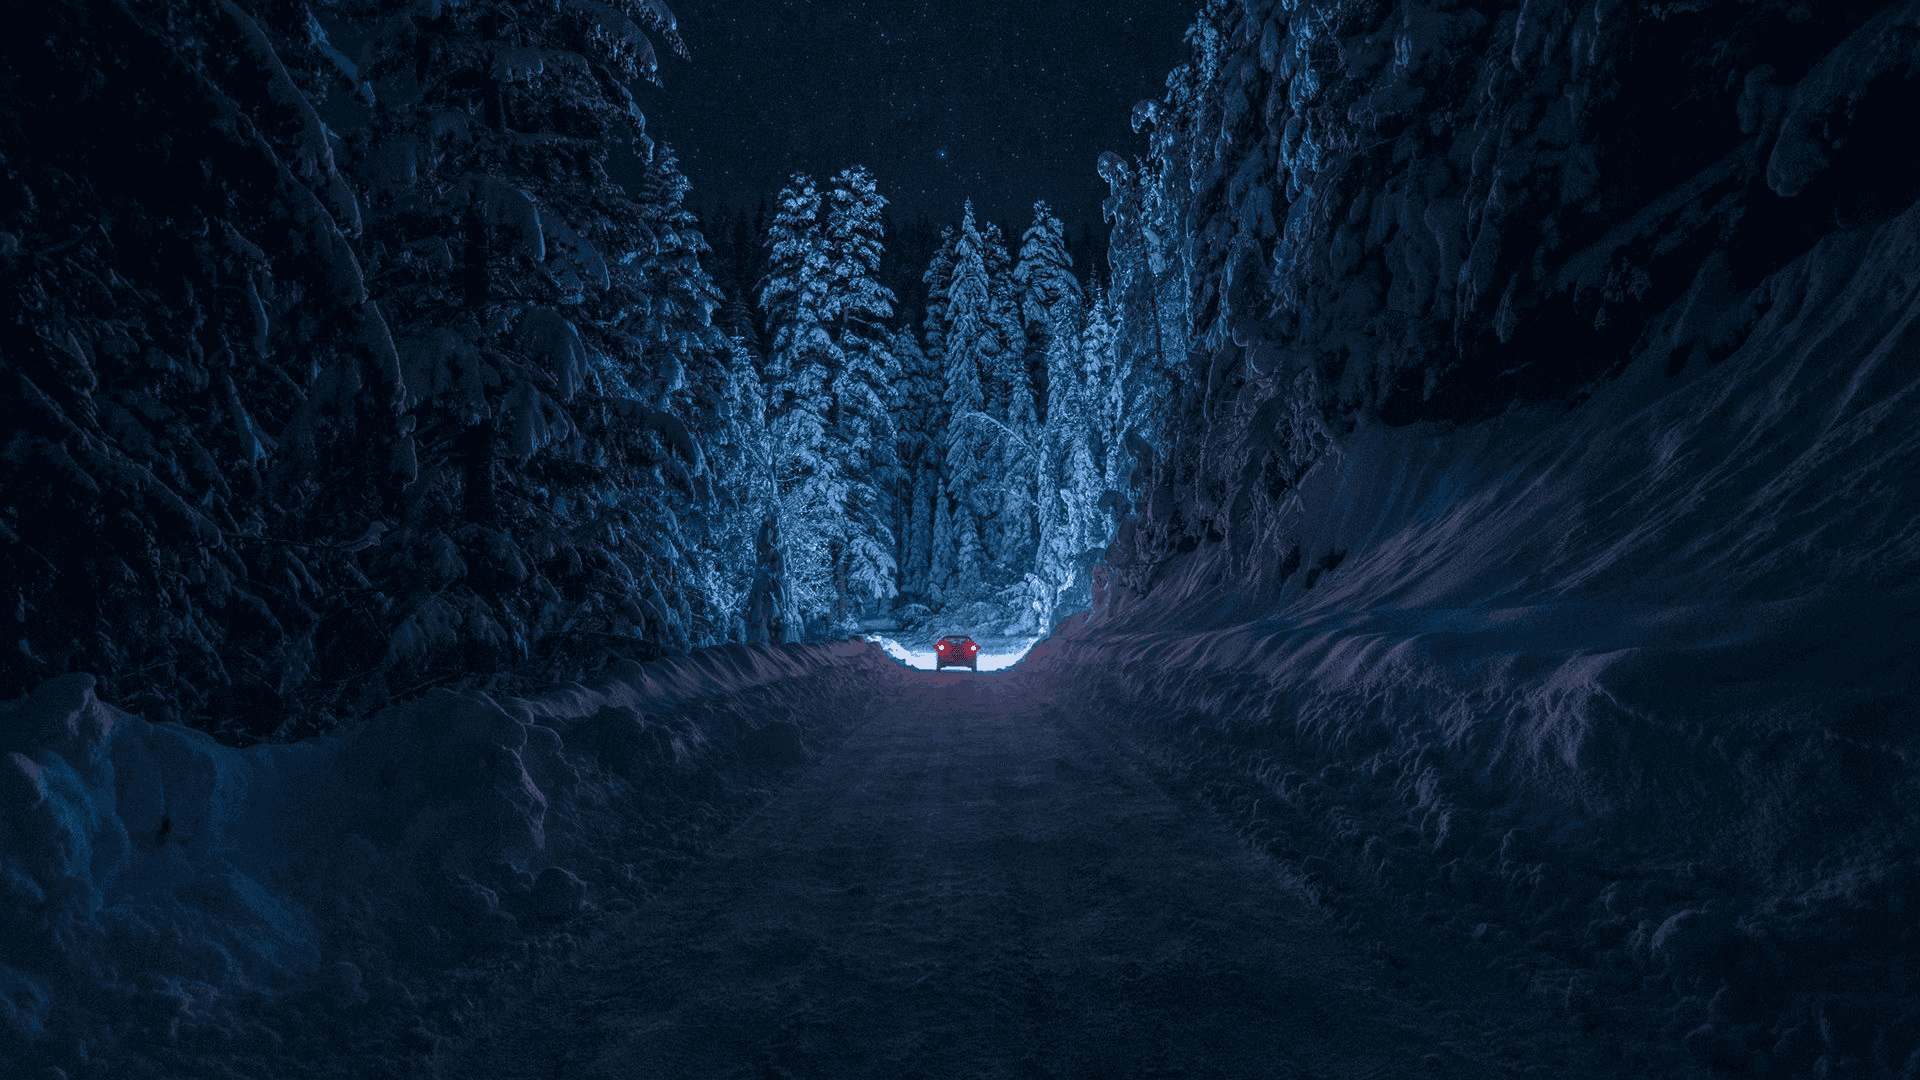 A Snowy Road With A Blue Light In The Middle